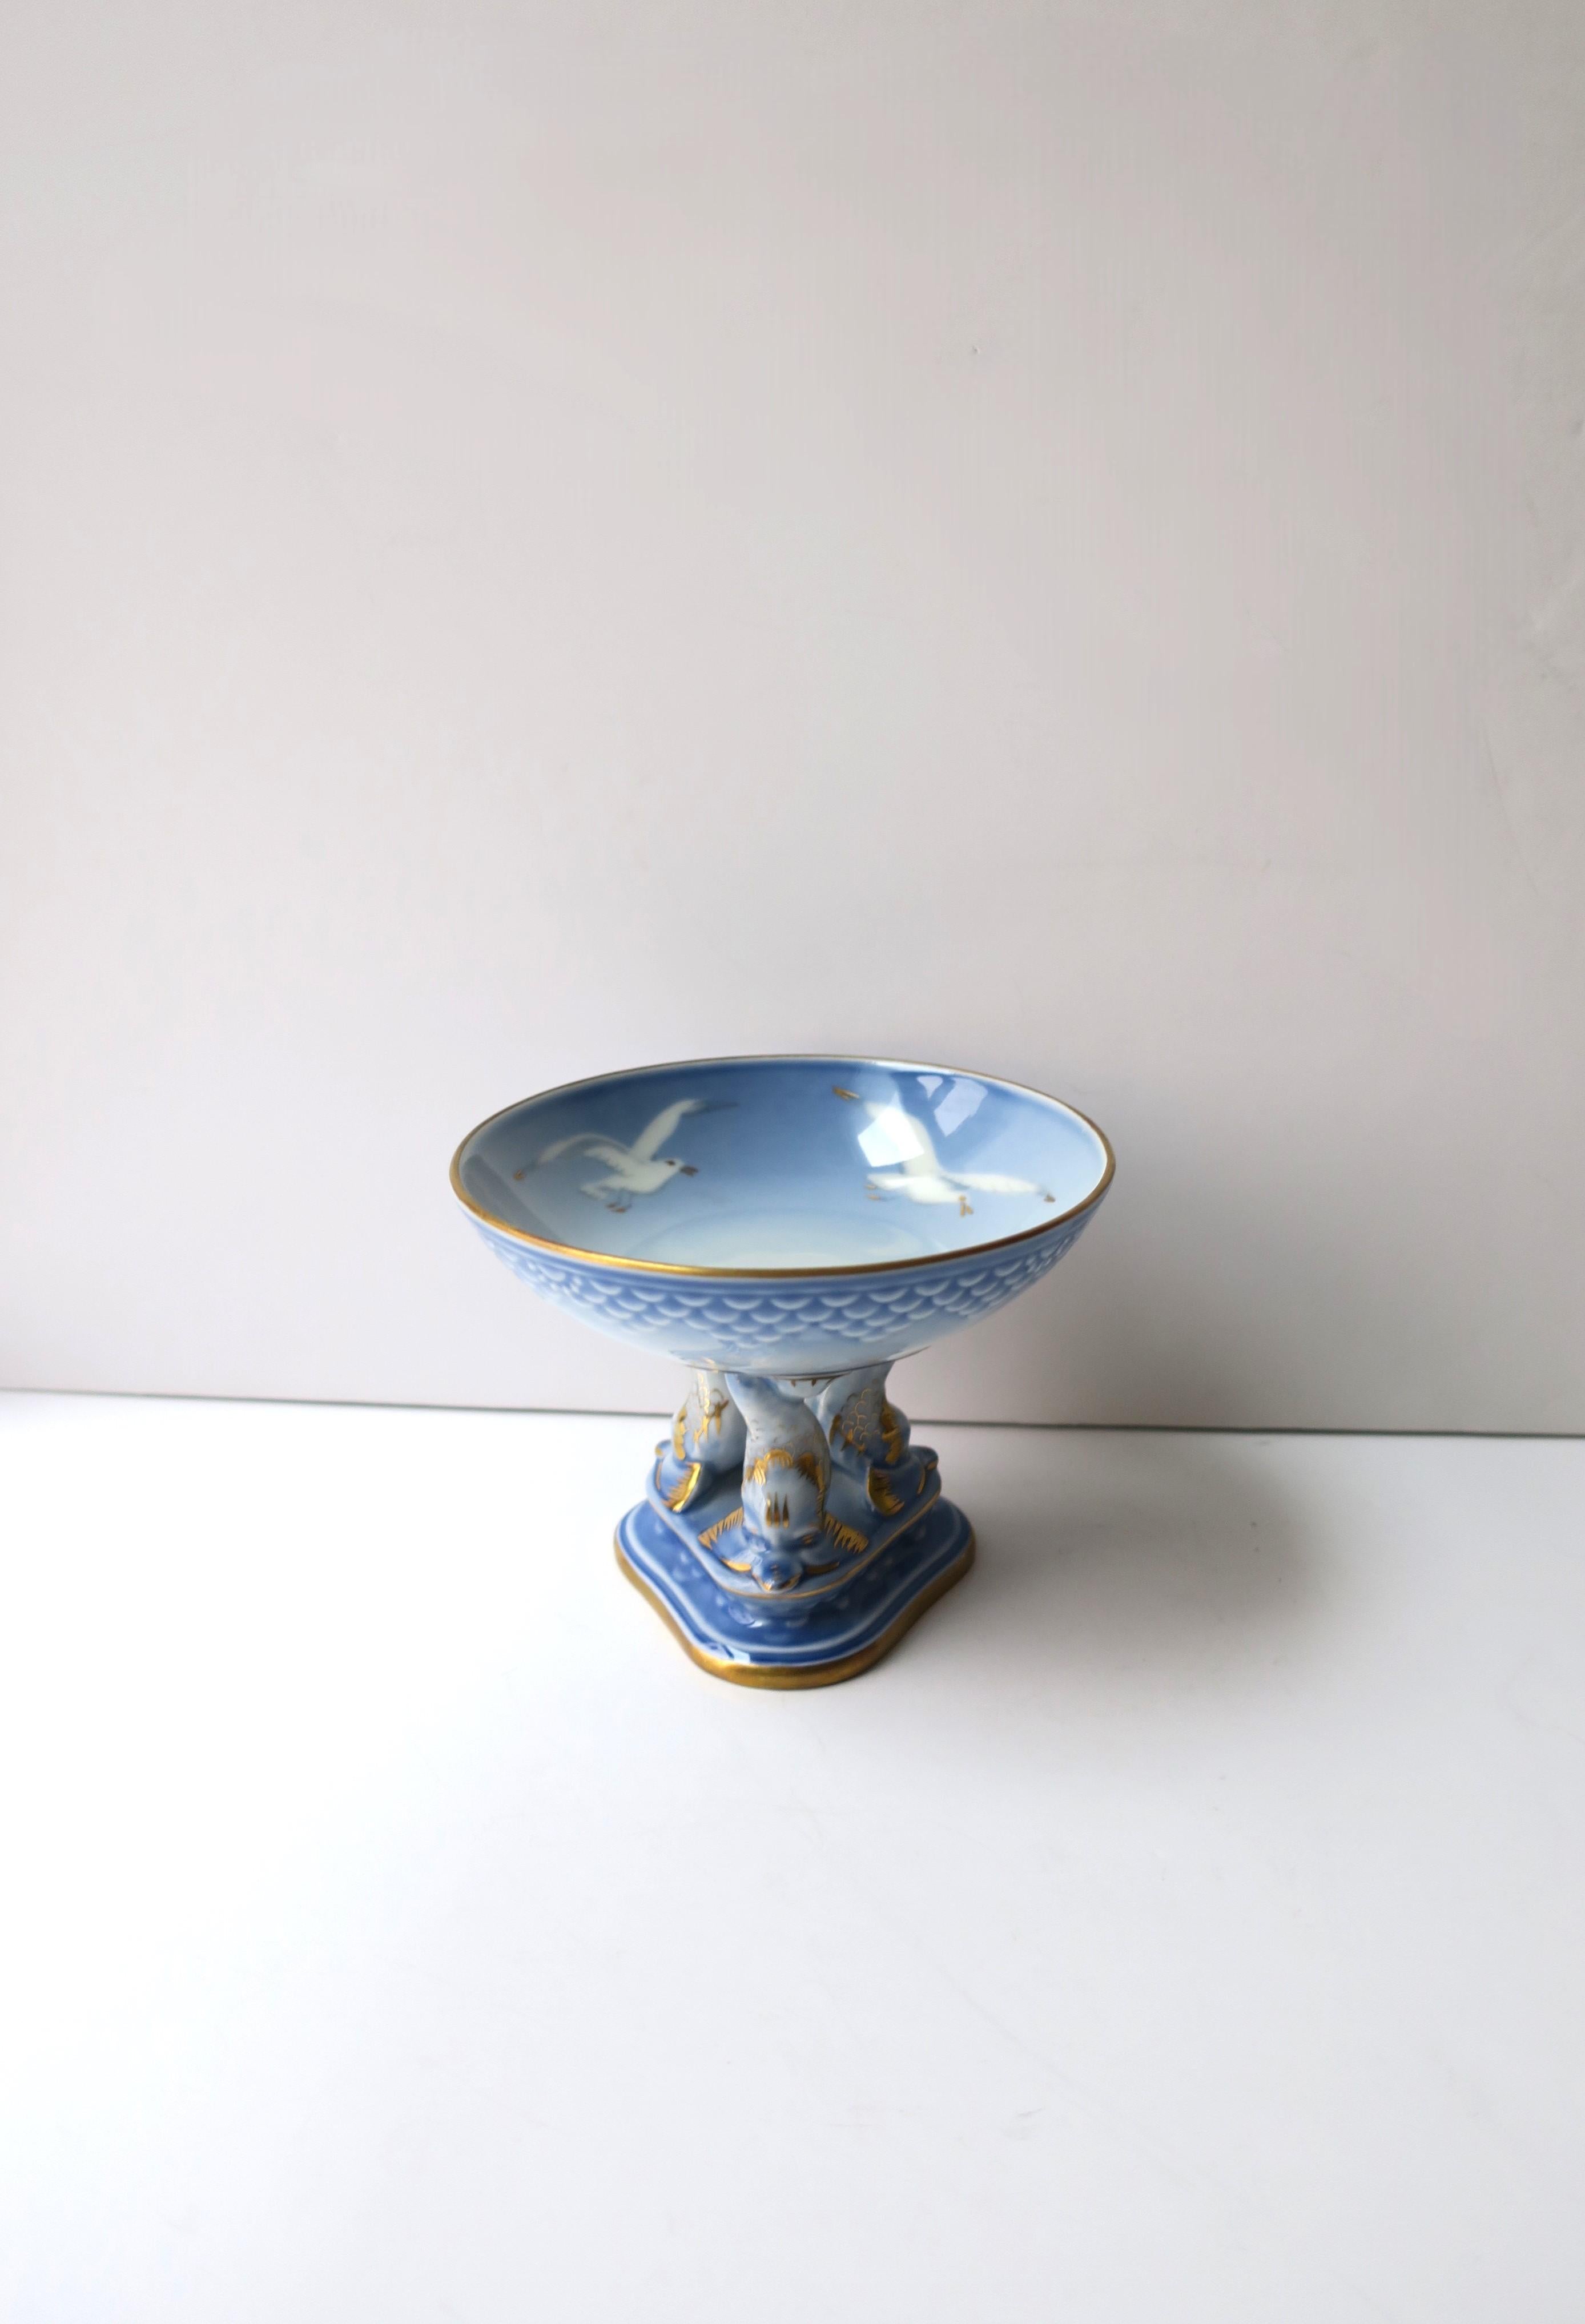 A beautiful Danish porcelain compote by Copenhagen Porcelain maker, Bing and Grøndahl, circa early to mid-20th century, Denmark. A porcelain compote or tazza which showcases the company's signature design, the Seagull, which was created in 1892 by